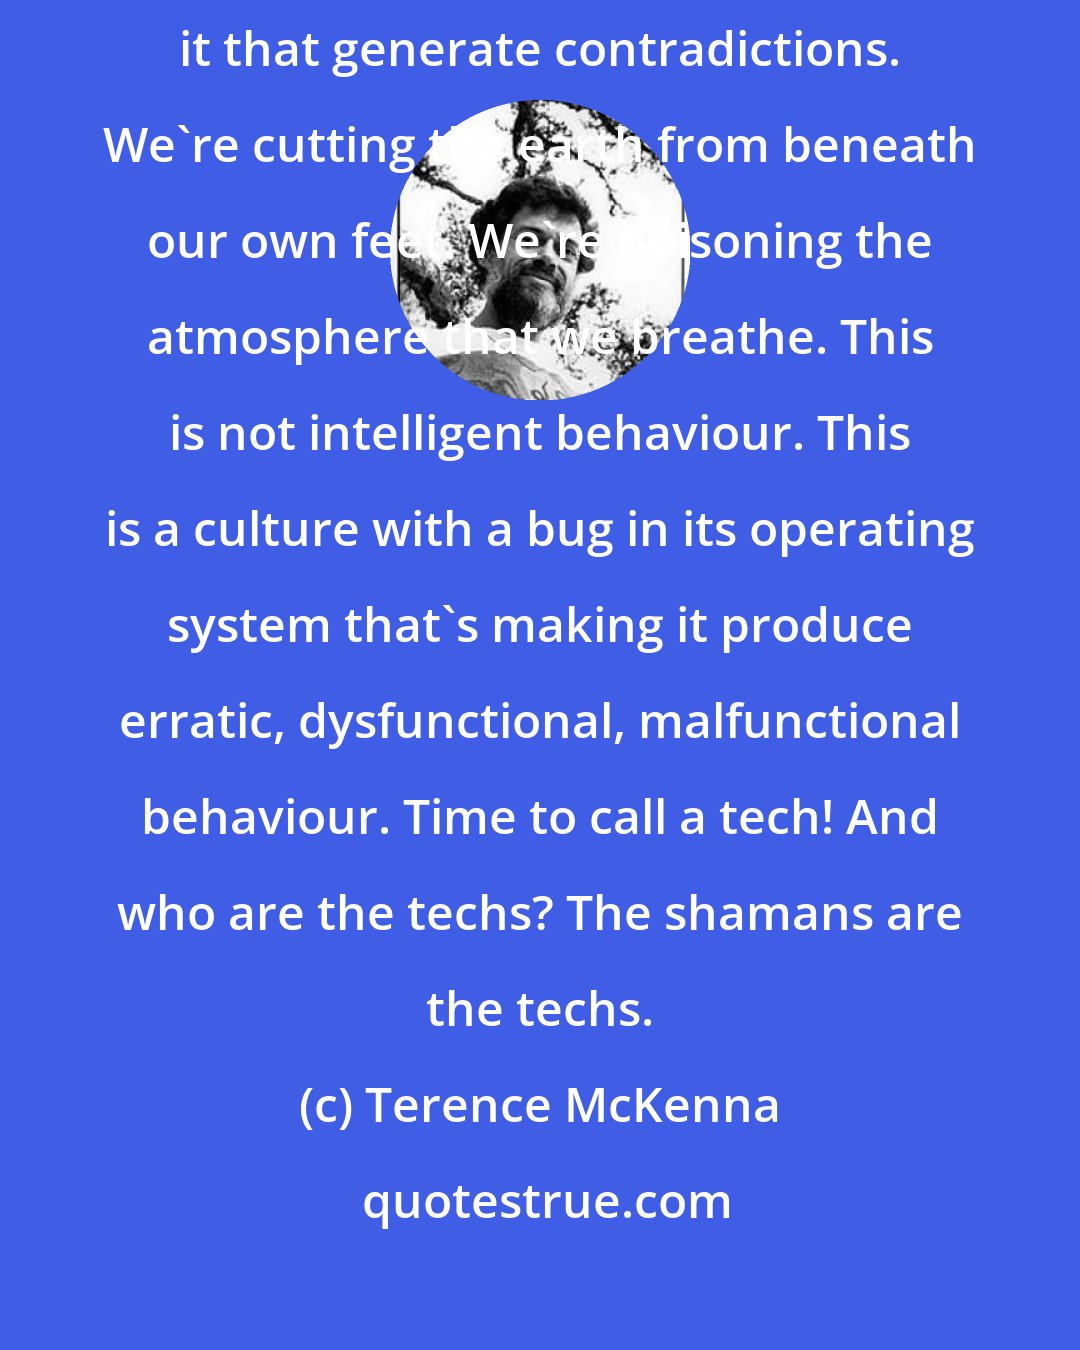 Terence McKenna: The current operating system [culture] is flawed. It actually has bugs in it that generate contradictions. We're cutting the earth from beneath our own feet. We're poisoning the atmosphere that we breathe. This is not intelligent behaviour. This is a culture with a bug in its operating system that's making it produce erratic, dysfunctional, malfunctional behaviour. Time to call a tech! And who are the techs? The shamans are the techs.